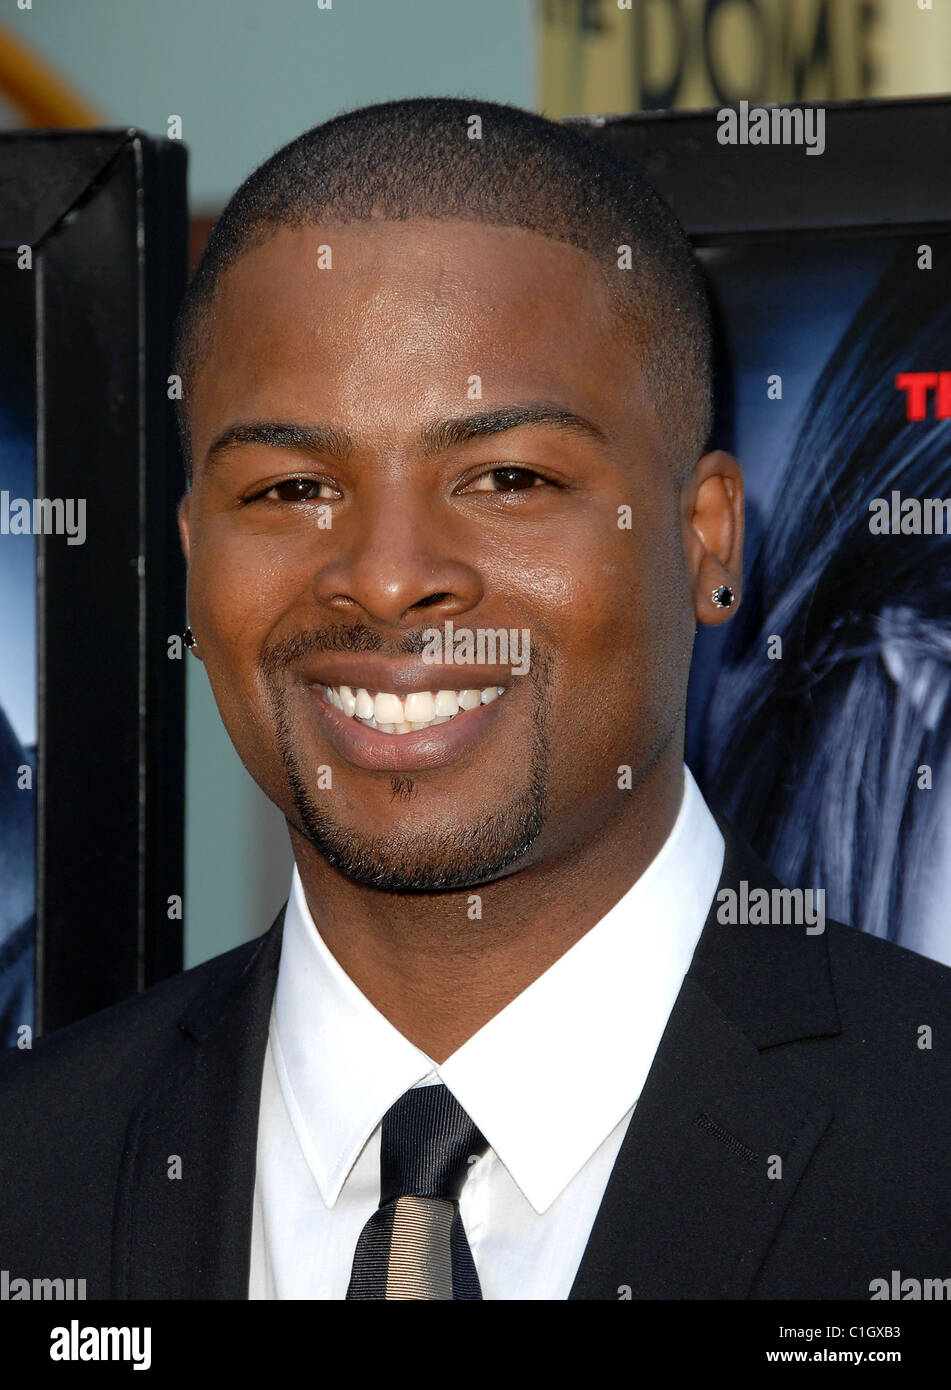 Craig Wayans Los Angeles Premiere of 'Dance Flick'  held at the Arclight Theatre - Arrivals Hollywood, California - 20.05.09 Stock Photo